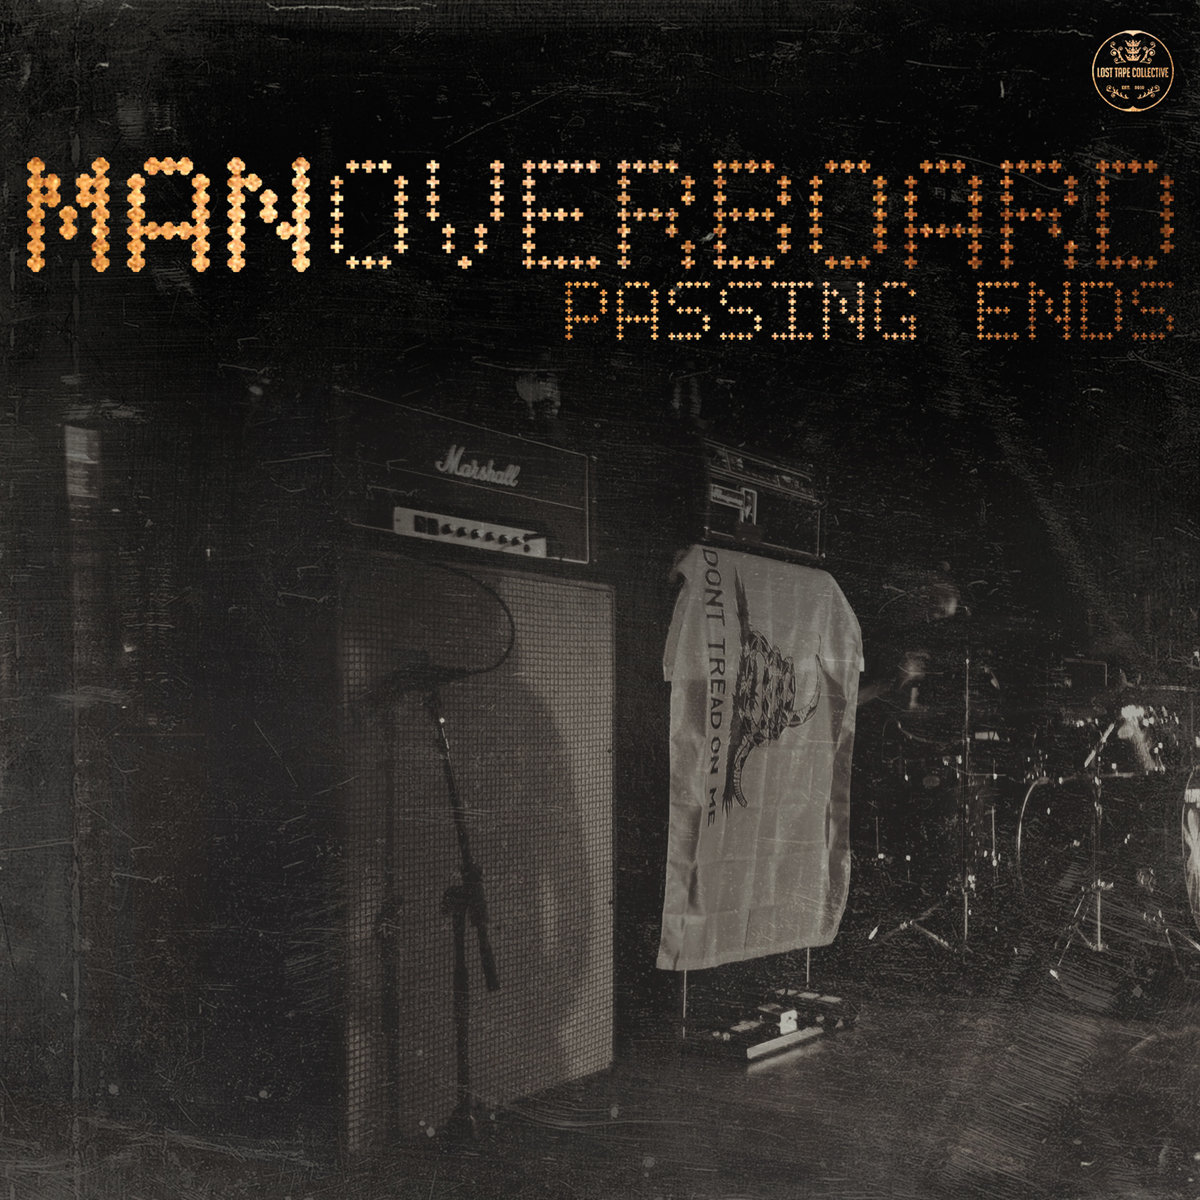 Man Overboard #18